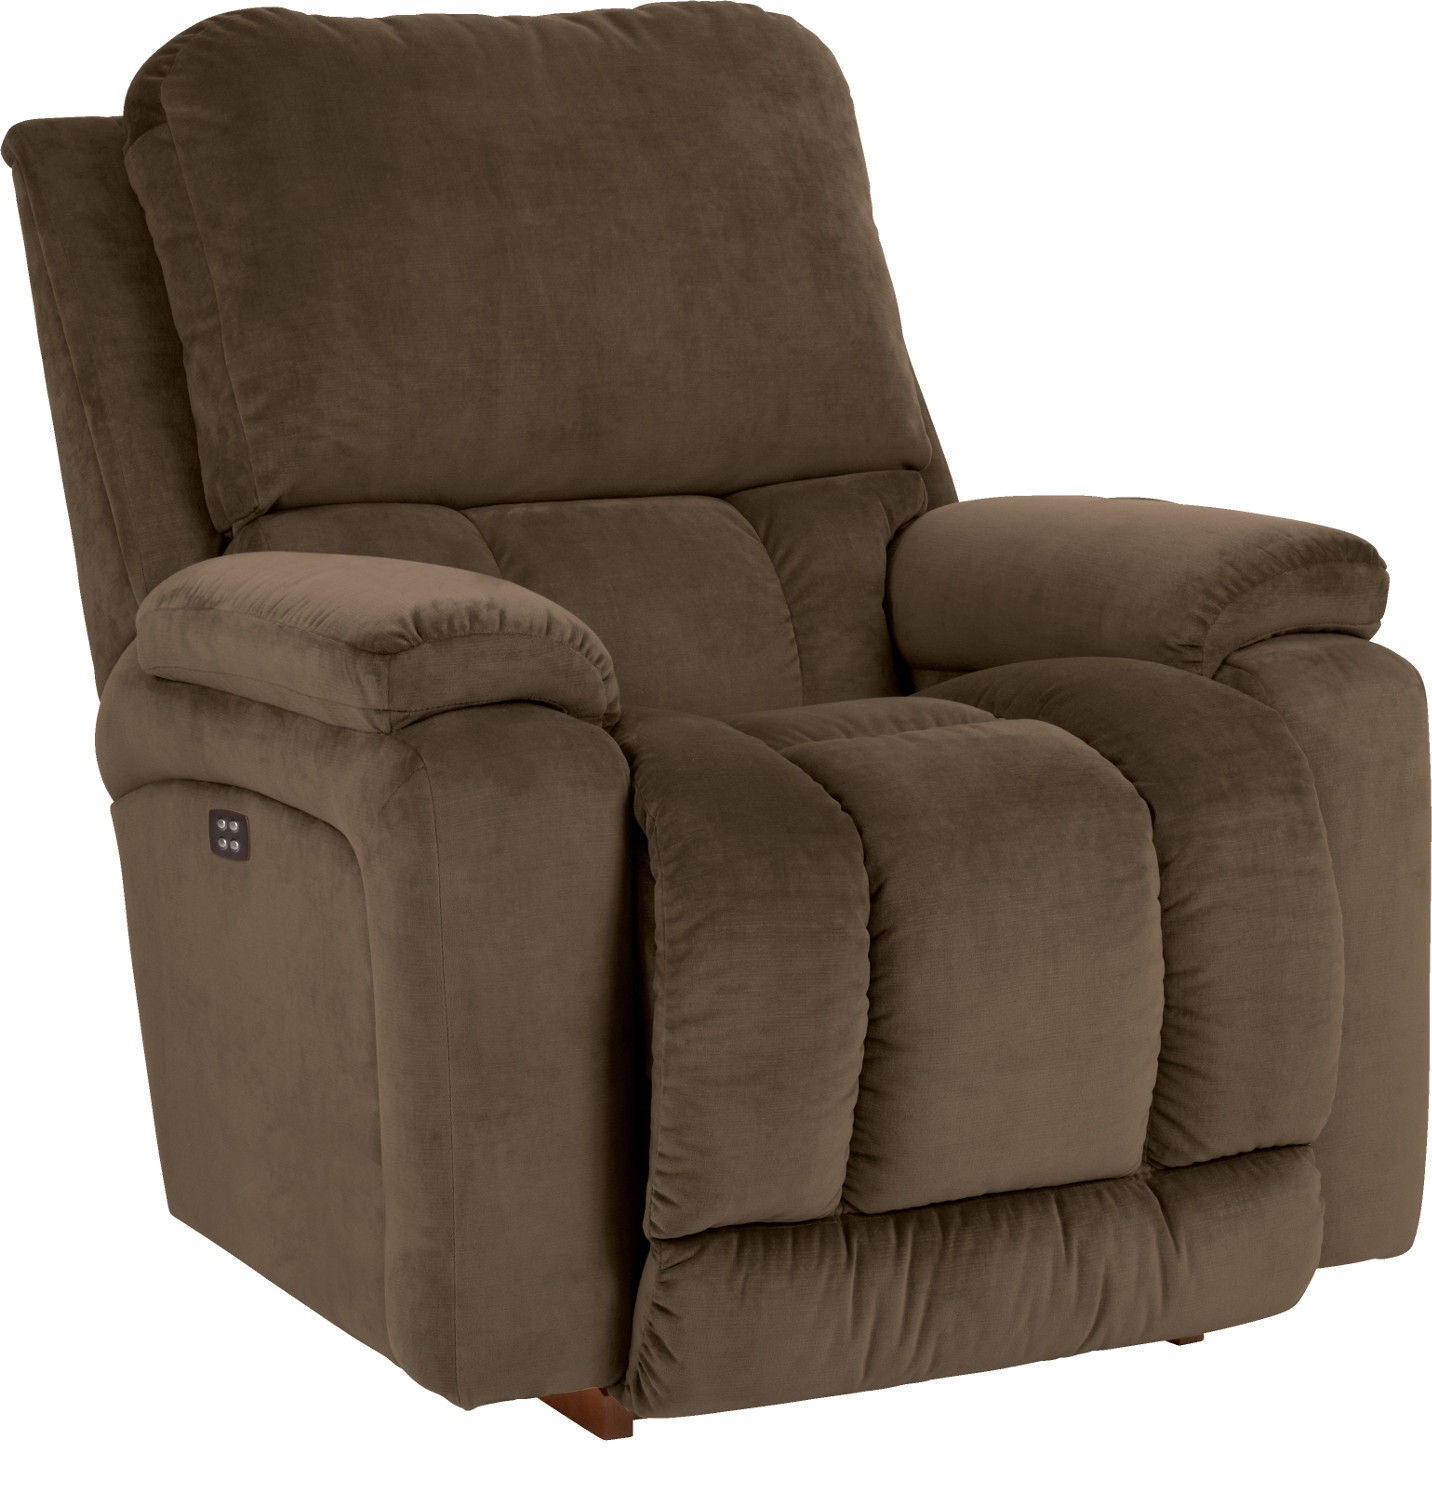 double wide lazy boy recliner